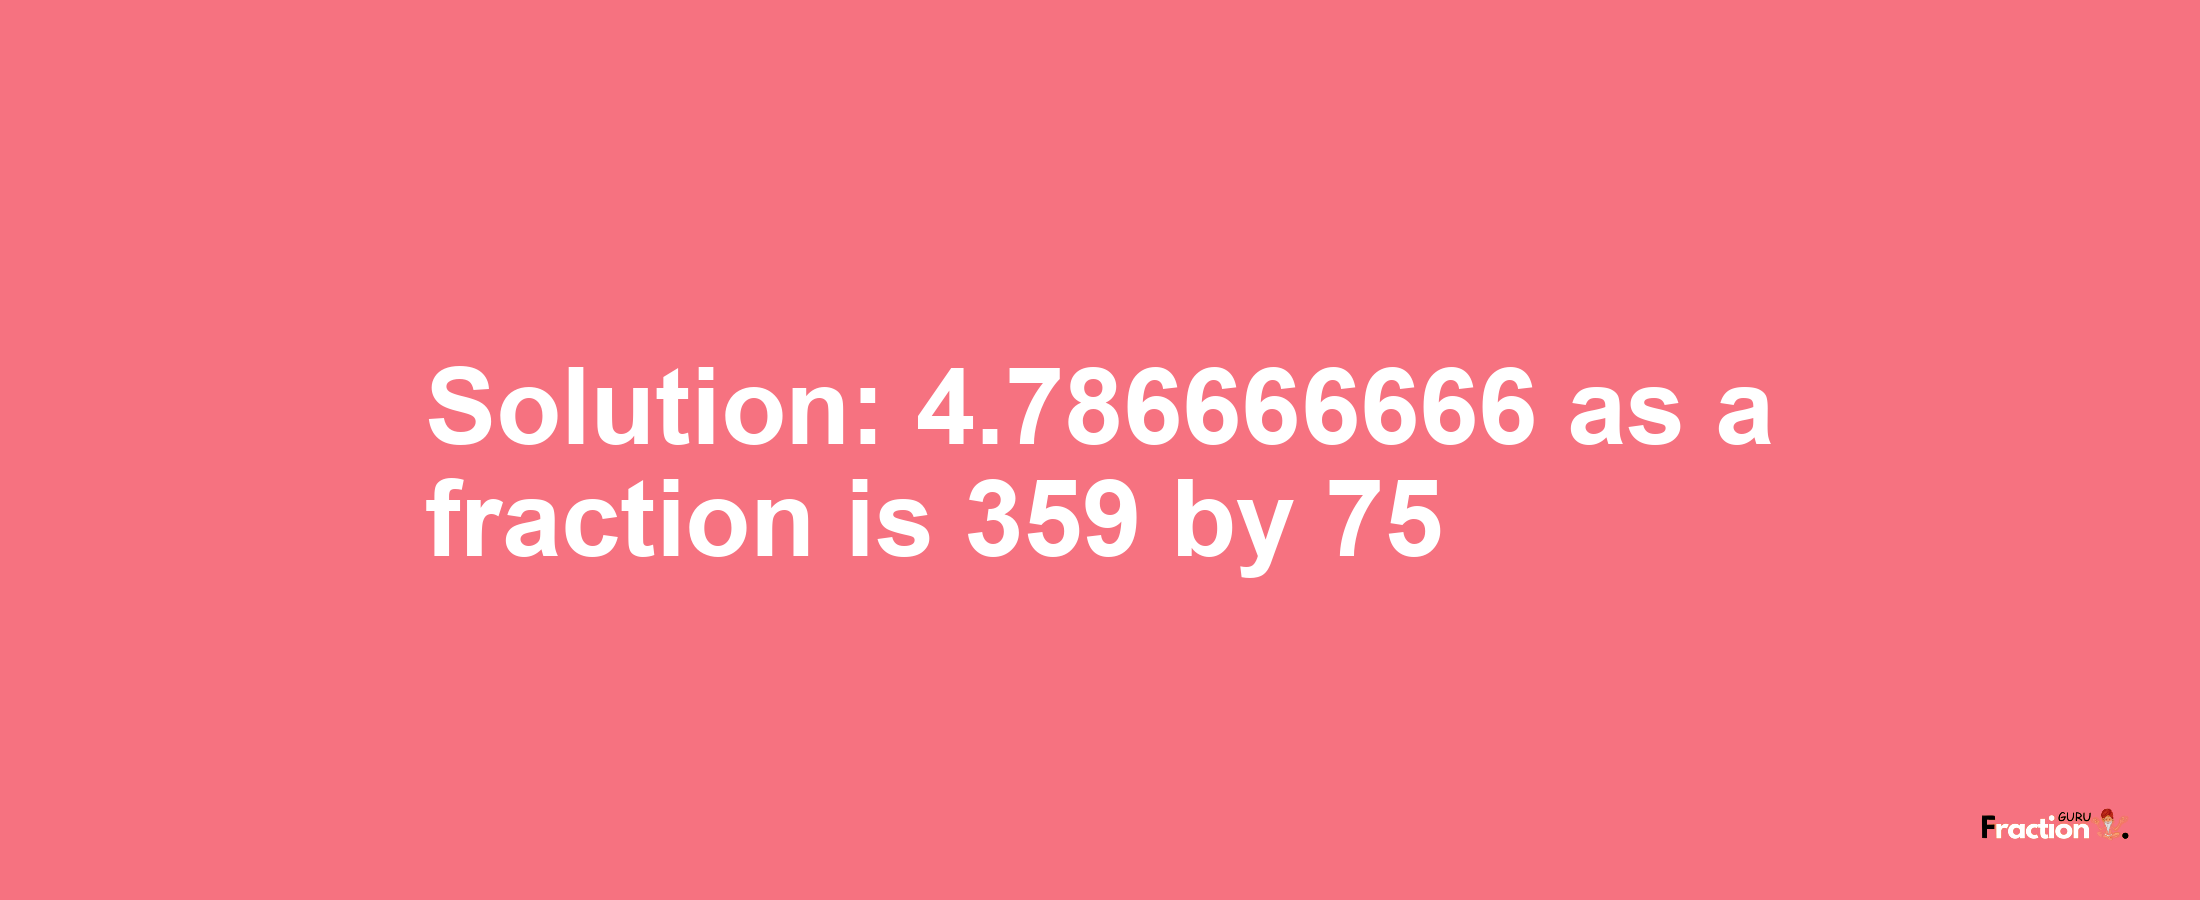 Solution:4.786666666 as a fraction is 359/75